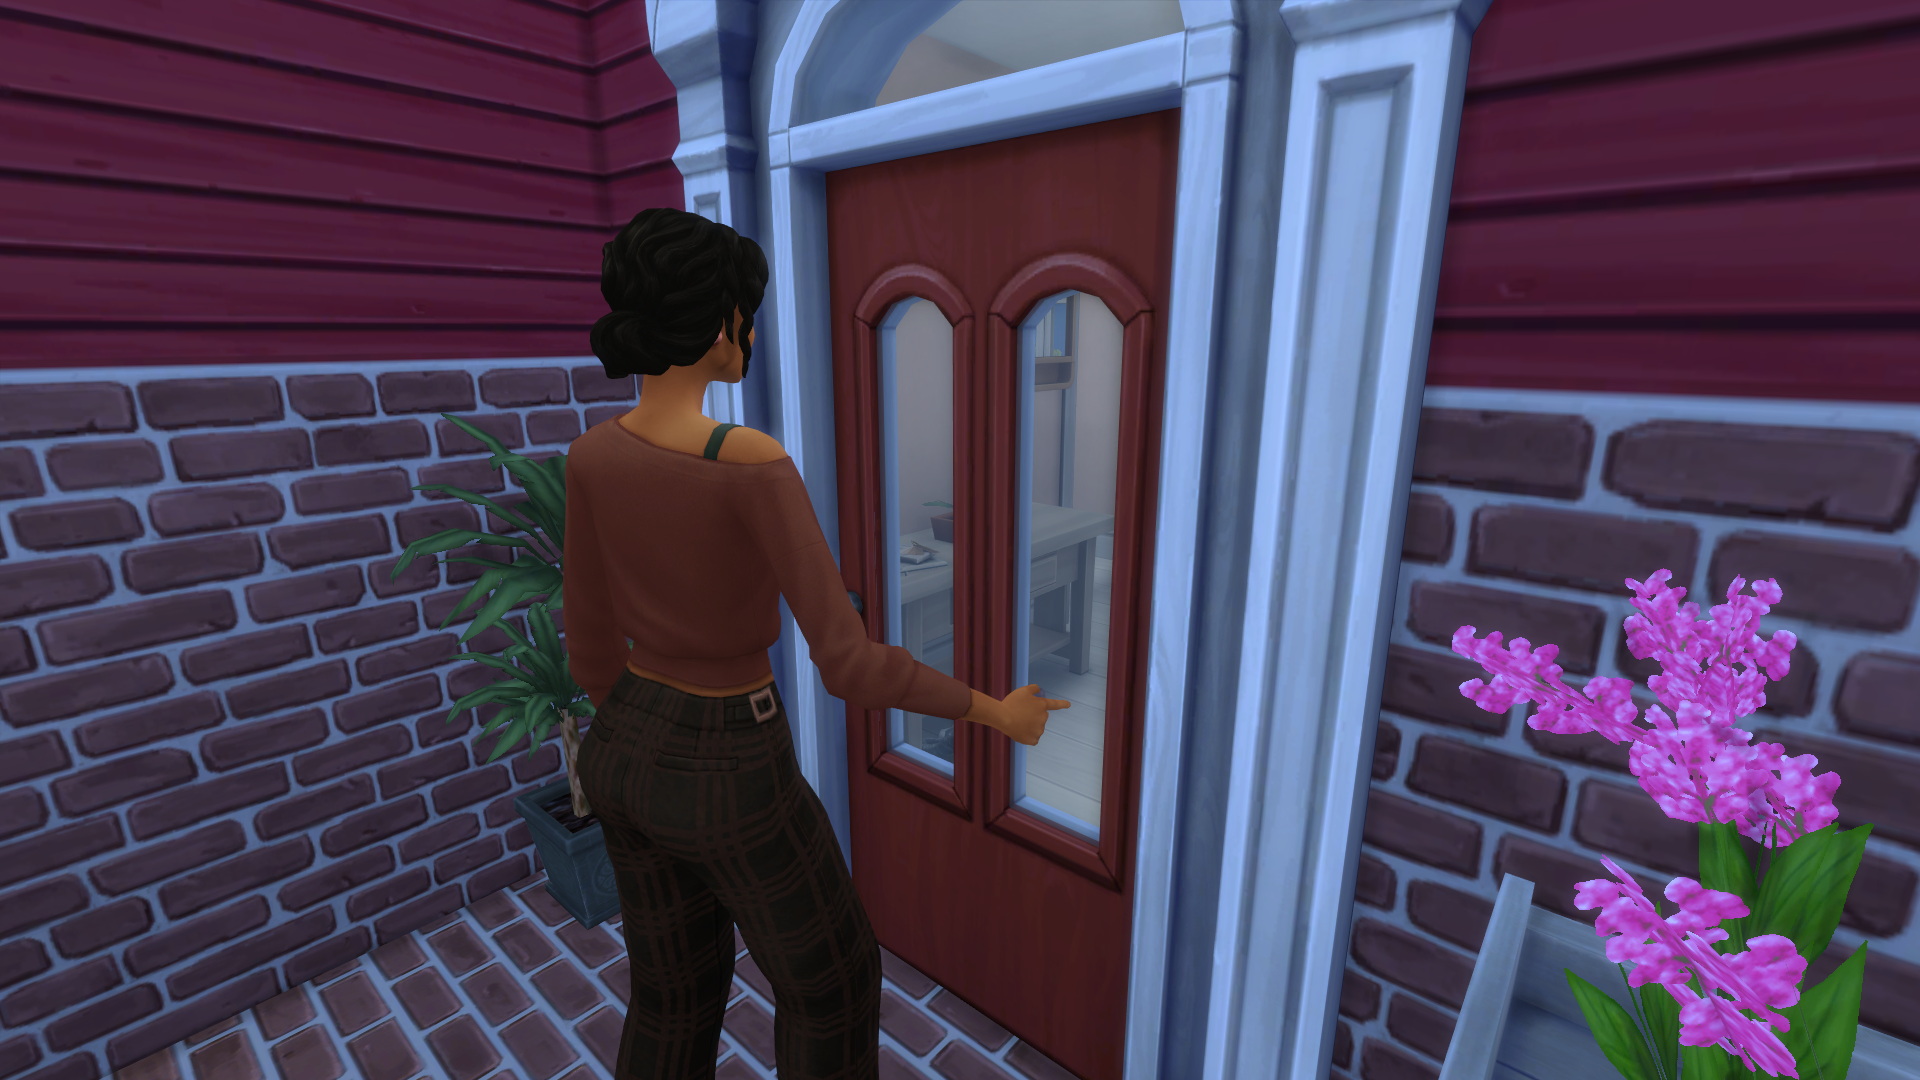 Ring My Bell - Knock on door default replacement at Mod The Sims 4 ...